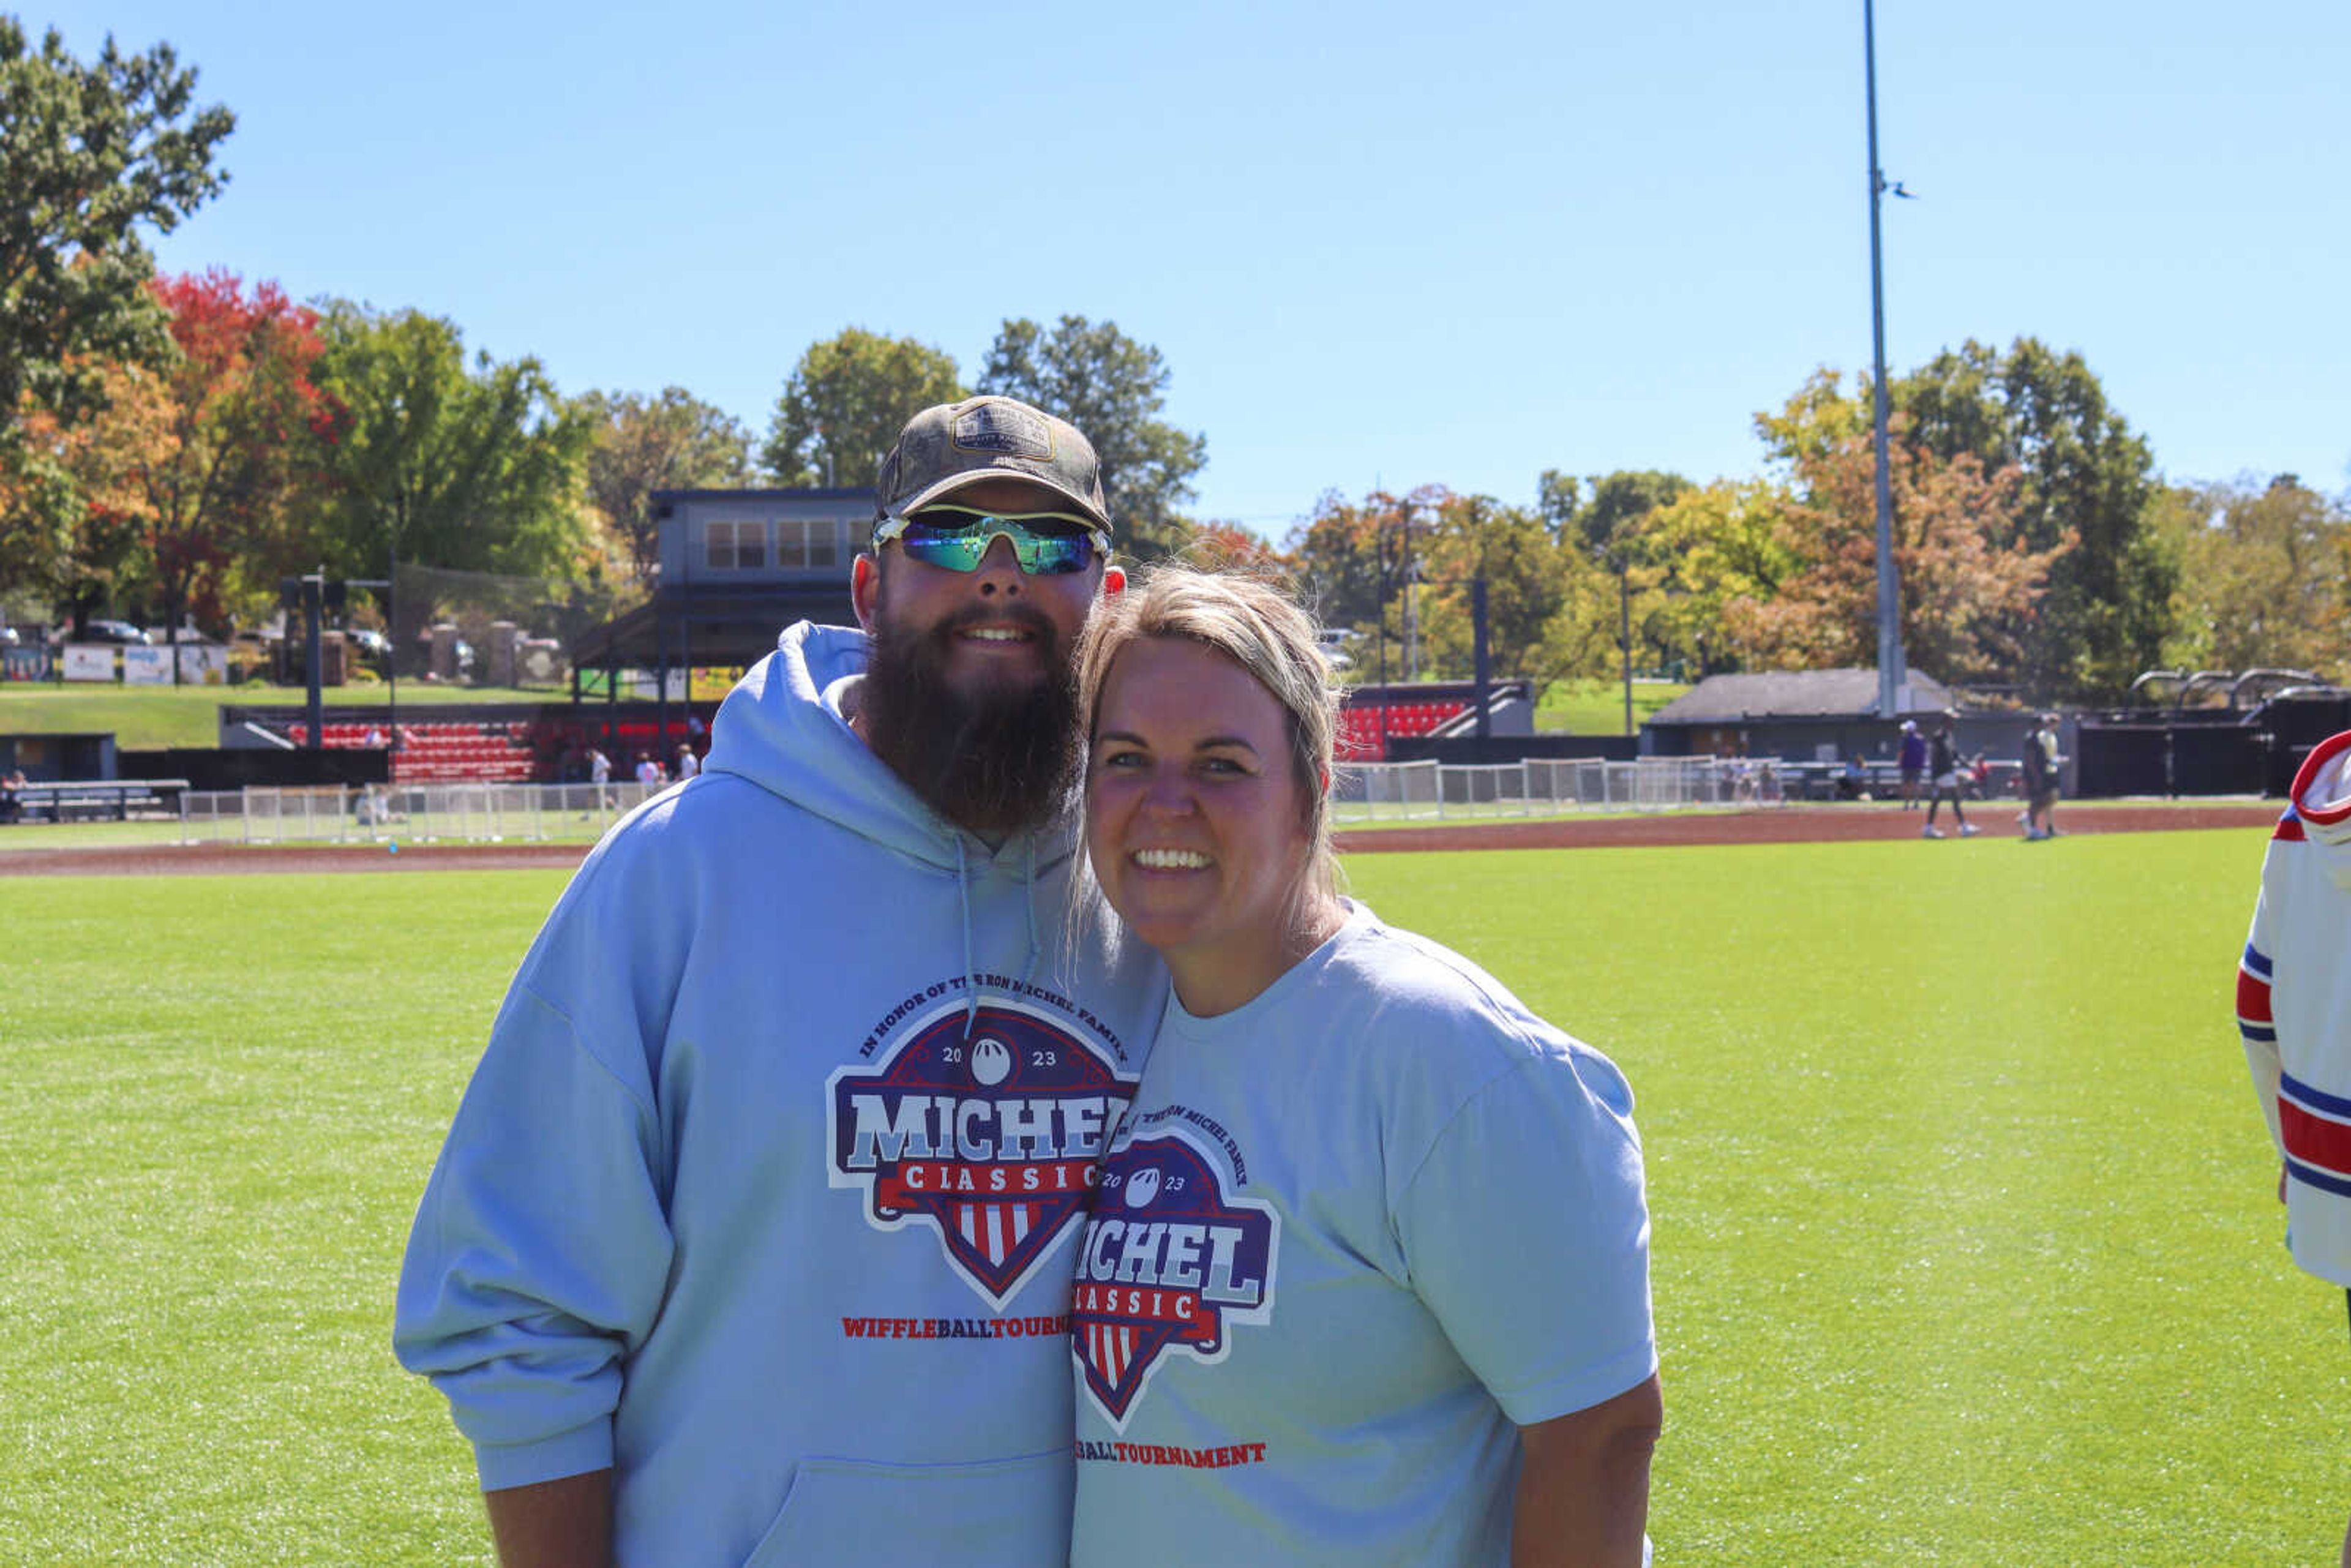 (Left) Matt Schellingerhout and his wife, Sarah Schellingerhout pose for a photo during the days festivities. Sarah, is a founder of the Michel Classic alongside her brother, Jeff, Sarah believes sports provide important lessons that can be used for the rest of your life.